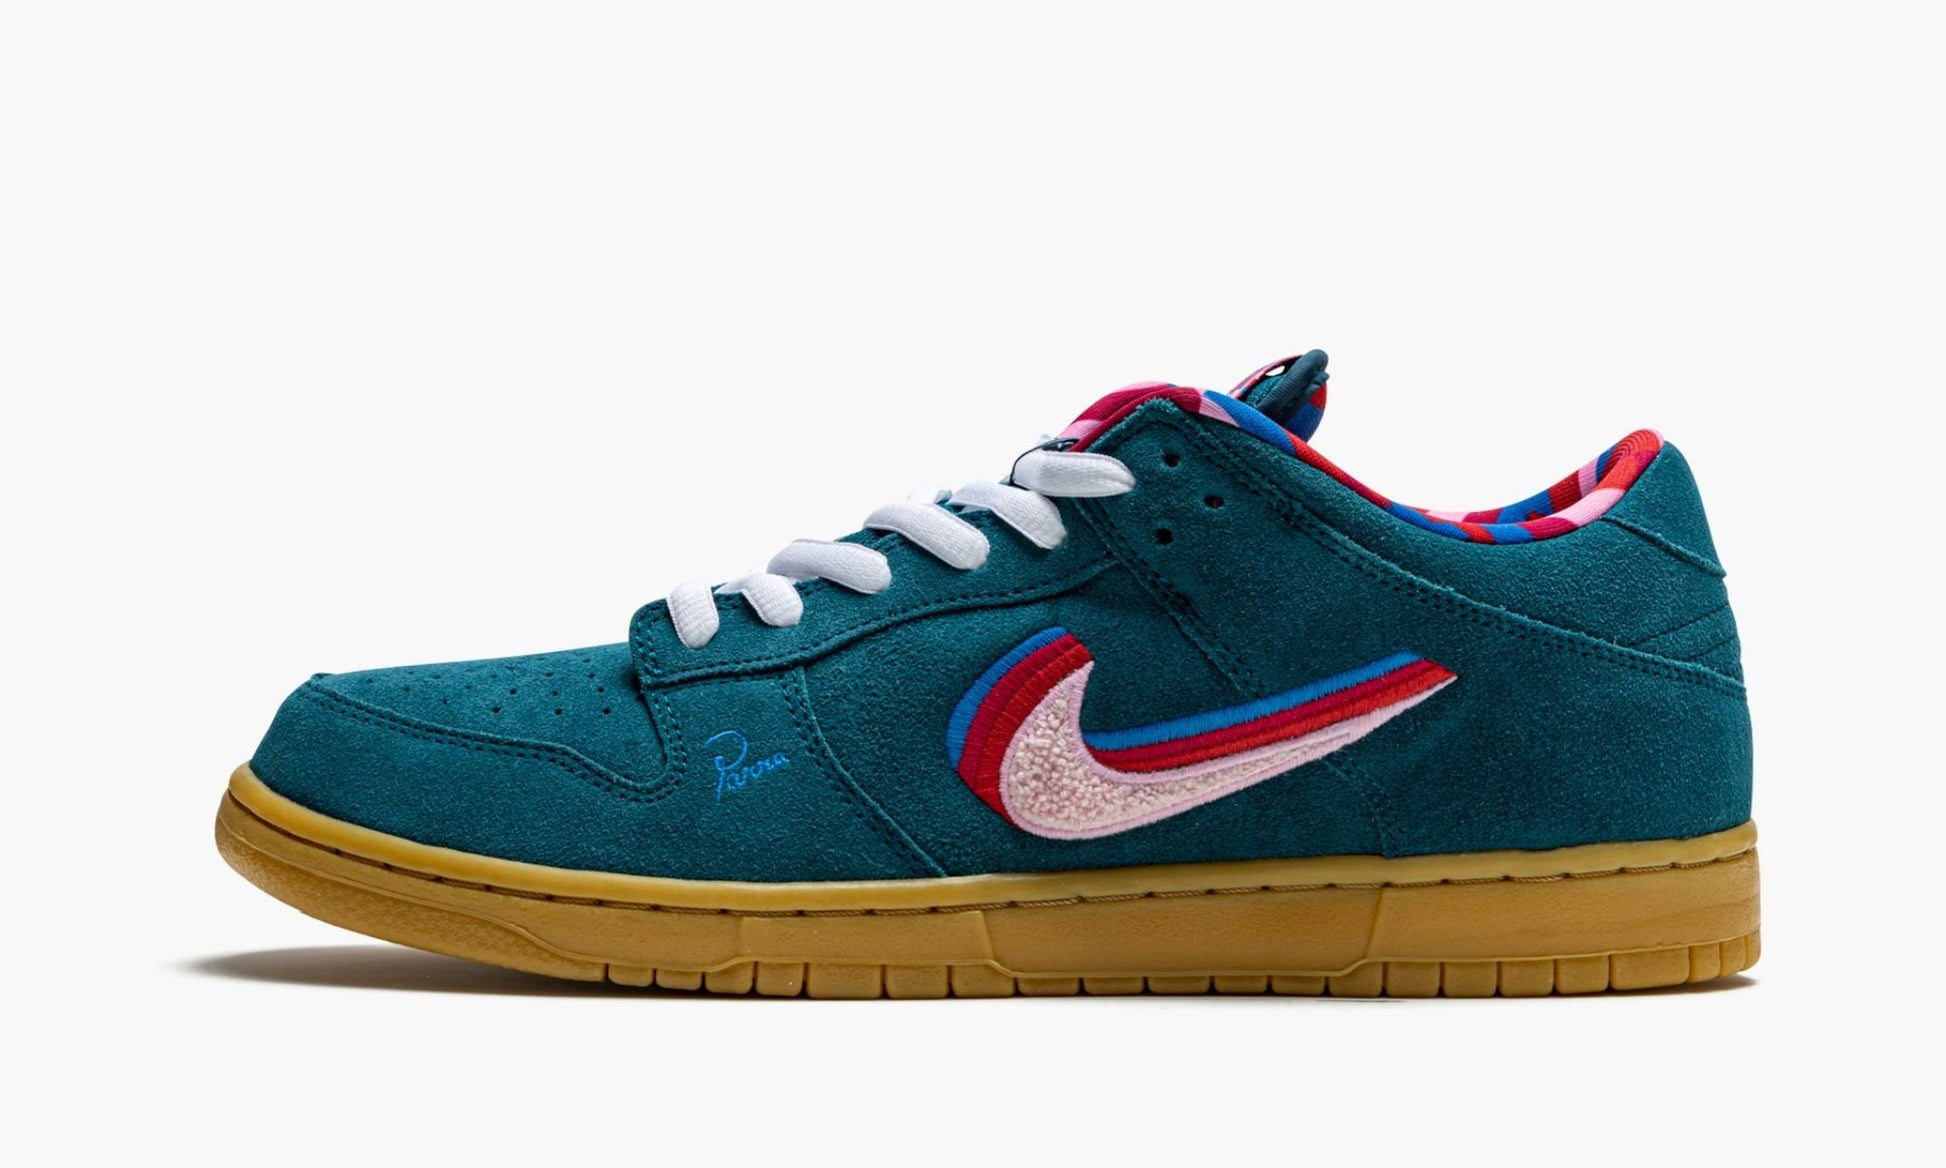 SB Dunk Low "Parra - Friends and Family"